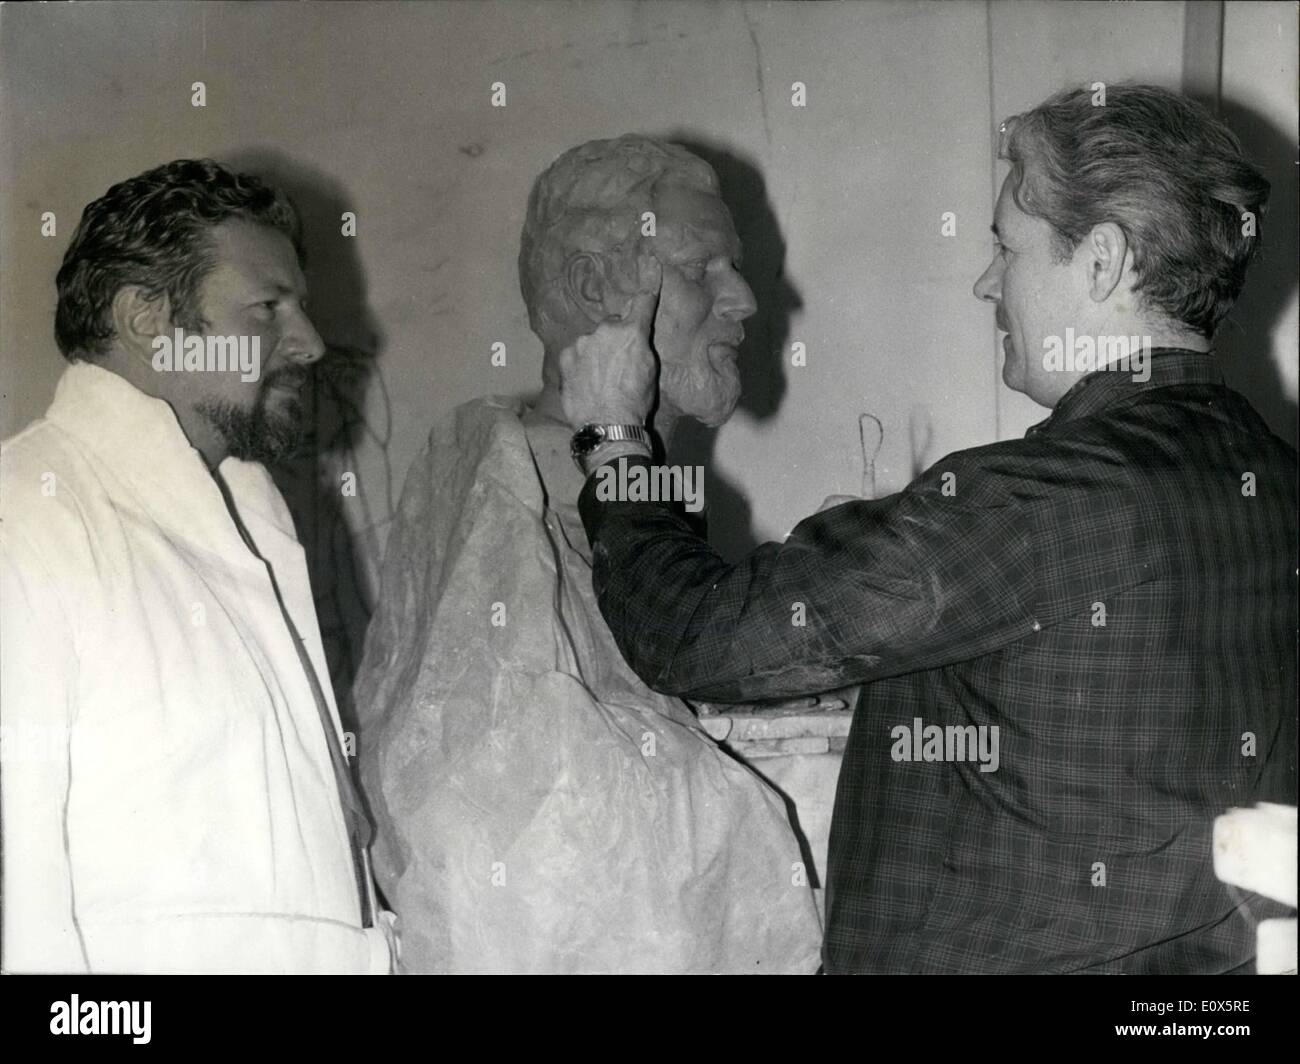 Jun. 06, 1965 - A Wax Statue For Peter Ustinov: Italian sculptor in Paris Barbier I is preparing now at the famous Grevin Museum in Paris, the was statue of famous actor Peter Ustinov. Photo shows sculptor making the statue of Peter Ustinov, in the presence of the model. Stock Photo